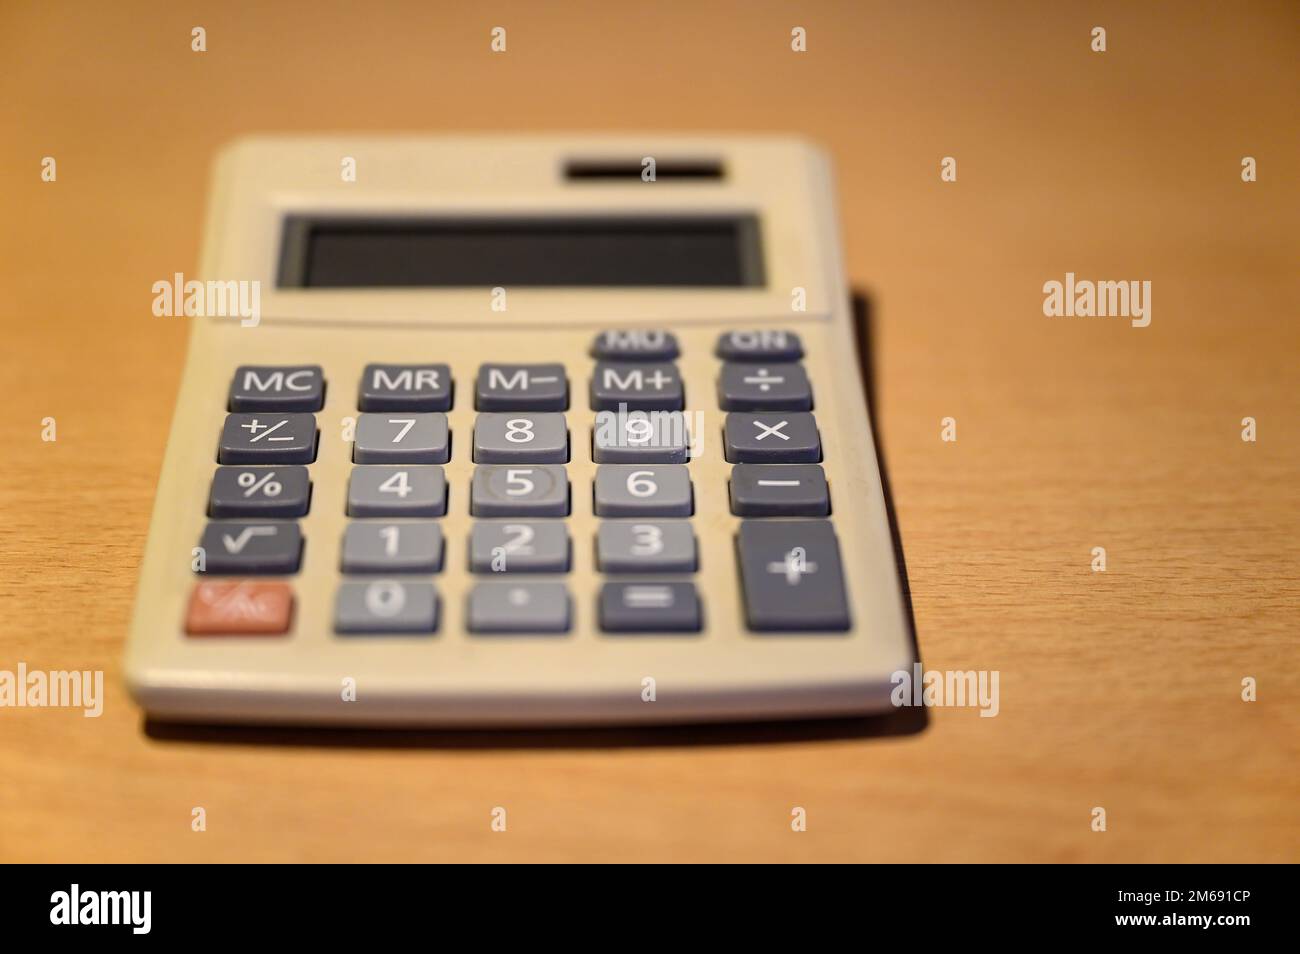 Electronic calculator on a desk. Basic solar desk calculator representing old technology. Focus on number 8 with shallow depth of field. No branding. Stock Photo